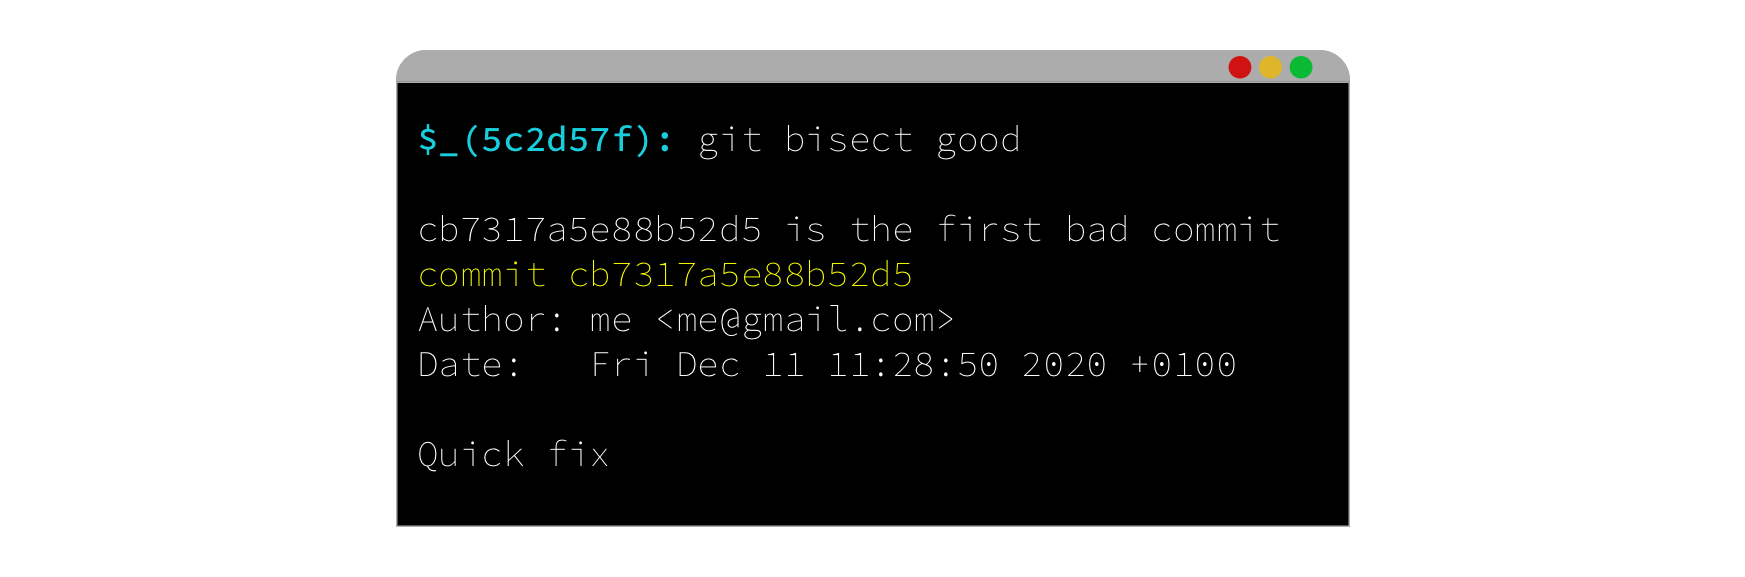 cli_bisect_final_step.png